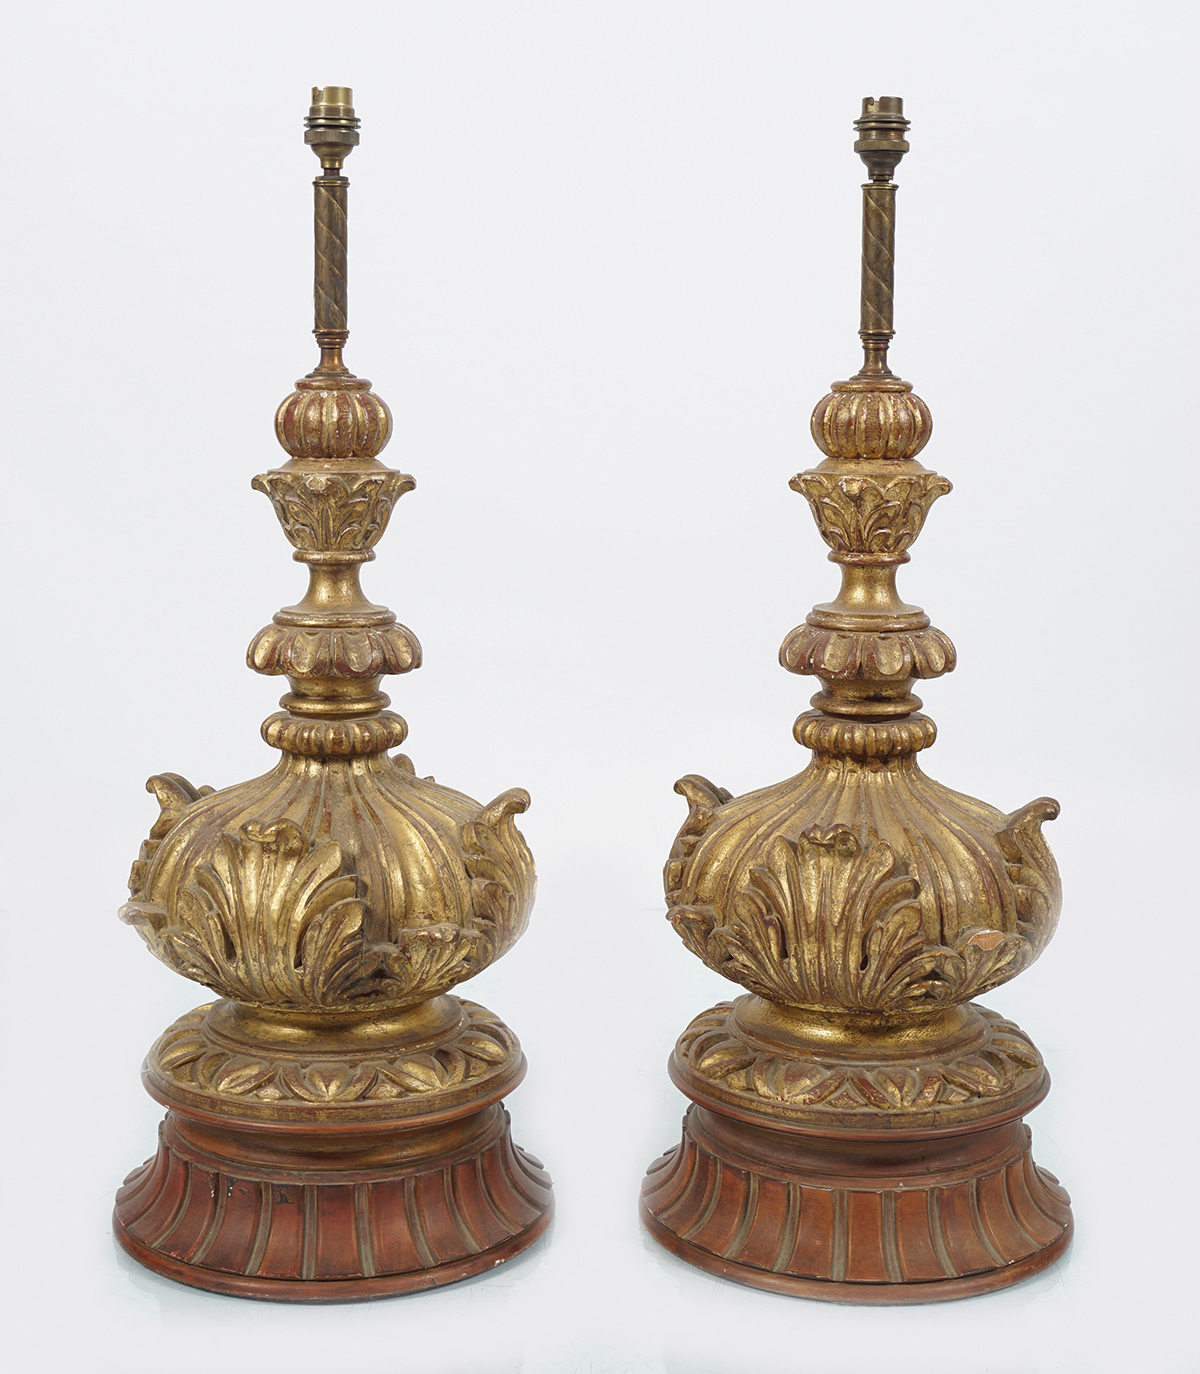 PAIR OF CARVED GILT WOOD TABLE LAMPS - Image 2 of 4